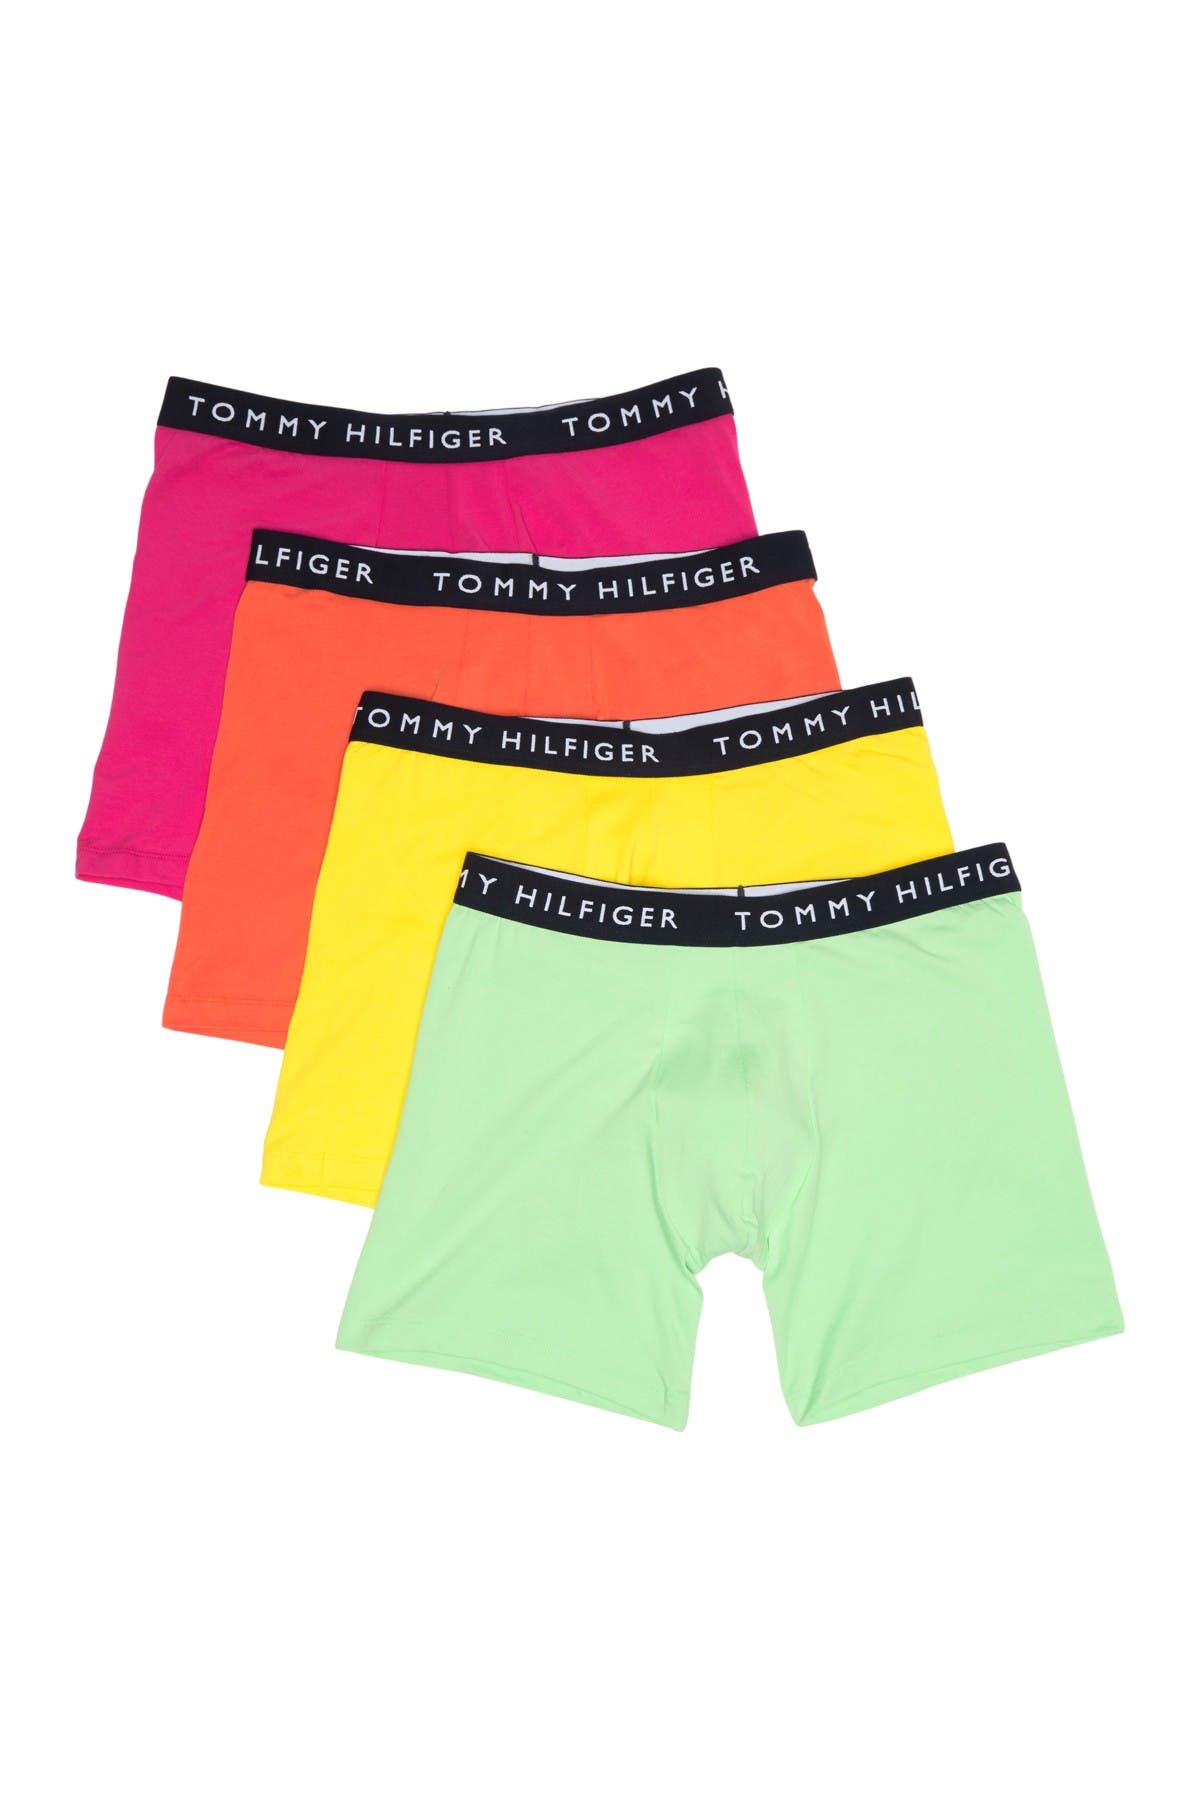 tommy hilfger boxers